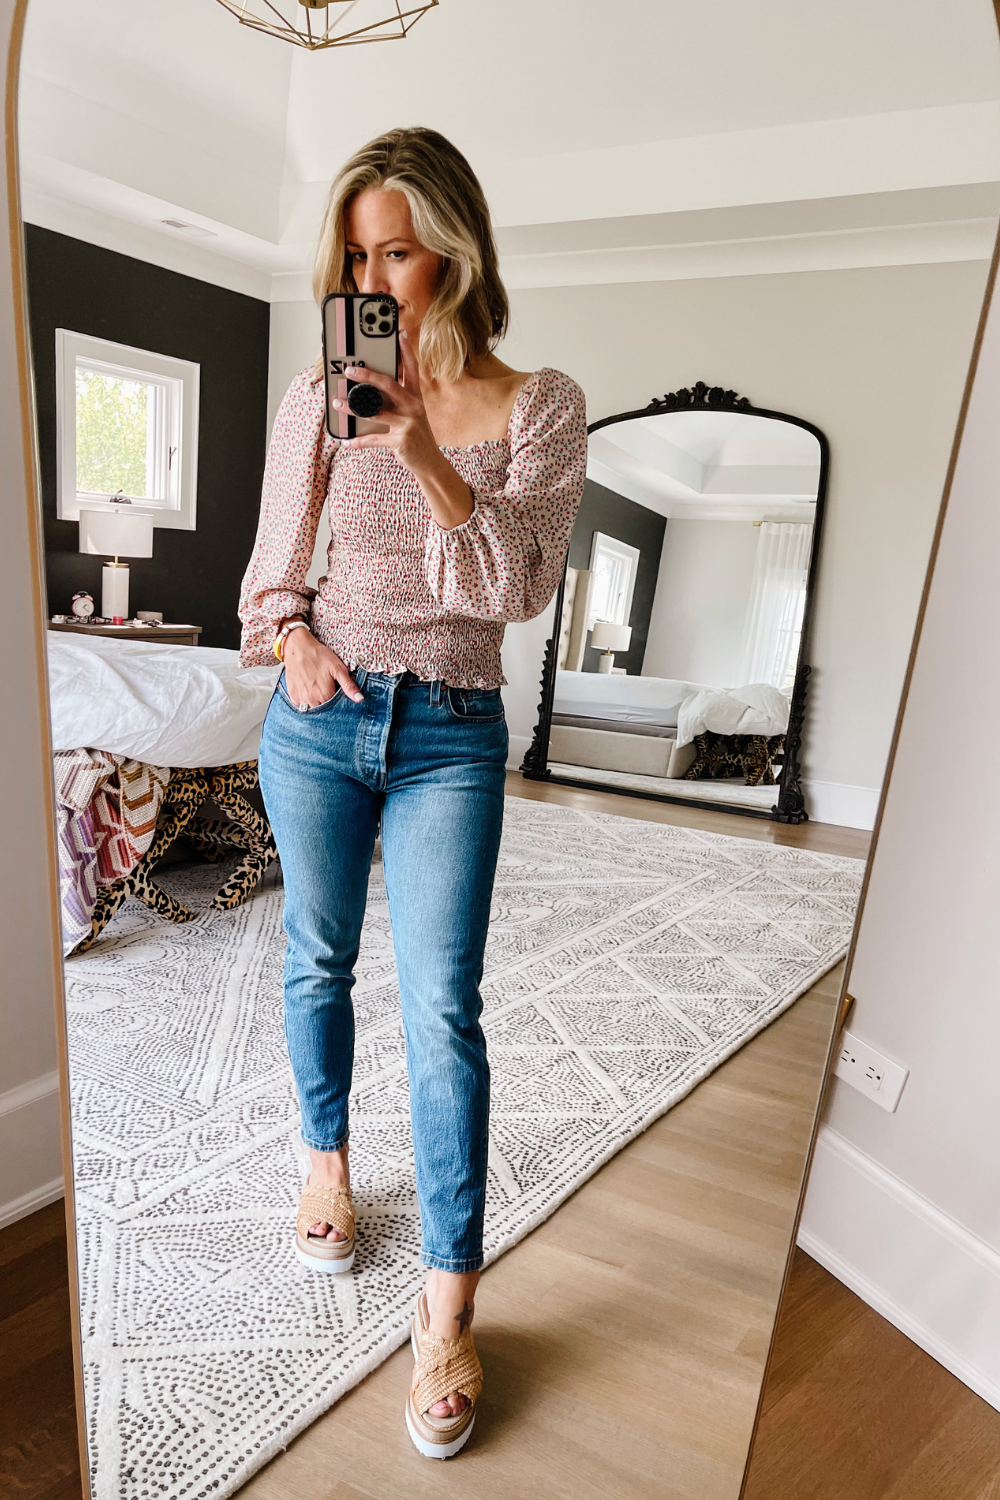 Suzanne wearing a floral square neck top, denim jeans and wedges